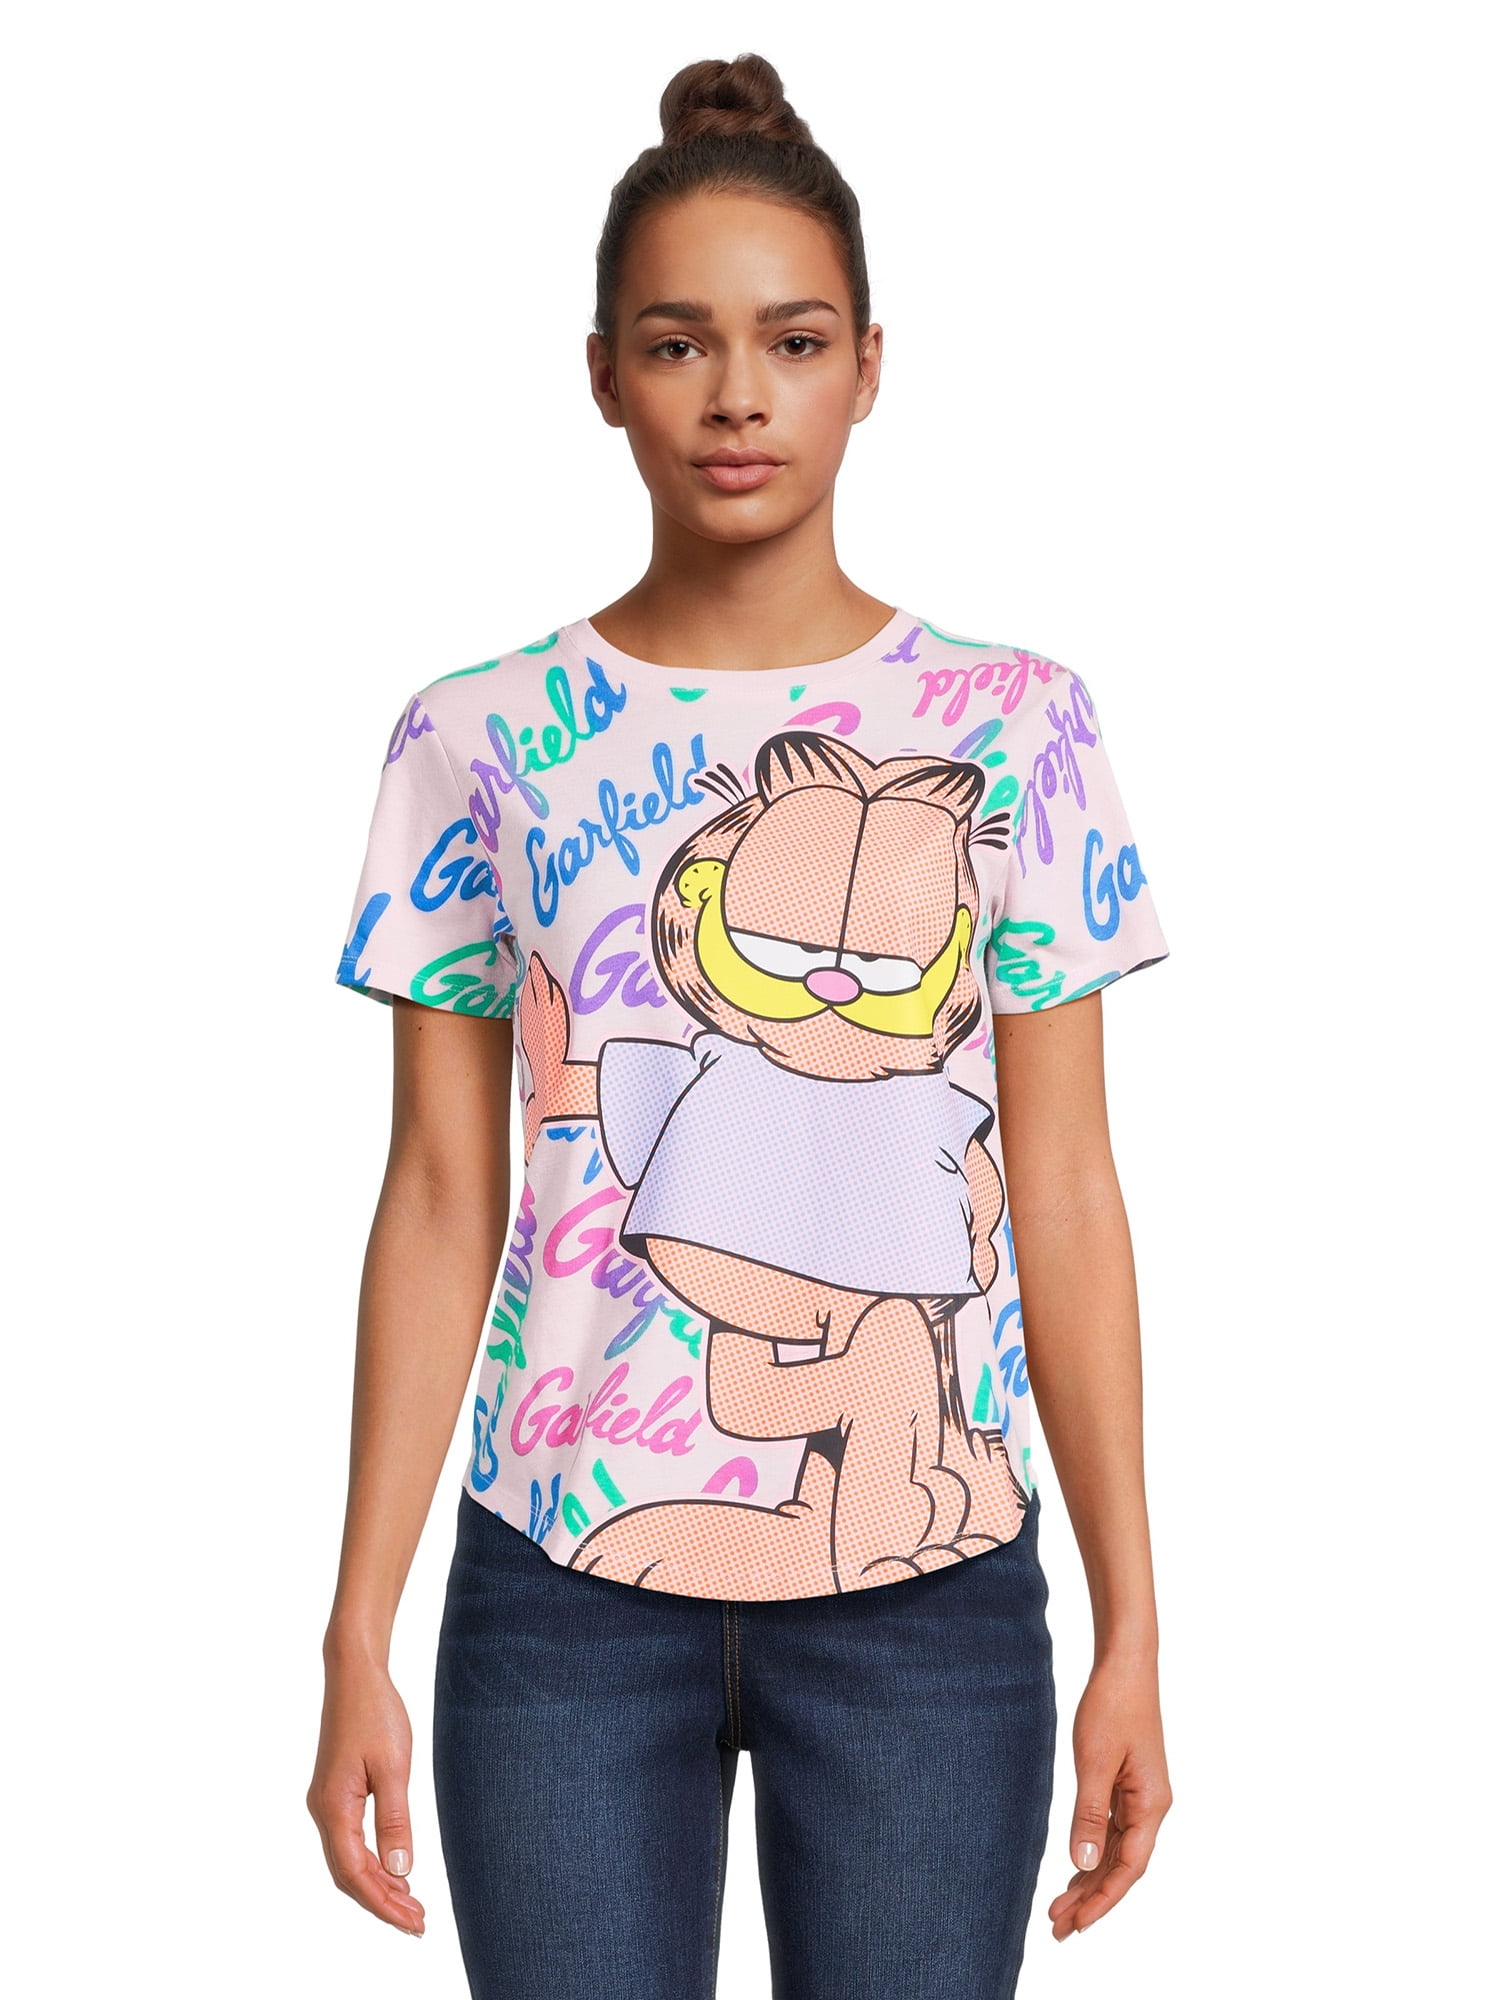 Garfield Juniors Print and Graphic Tee with Short Sleeves, Sizes XS-3XL ...